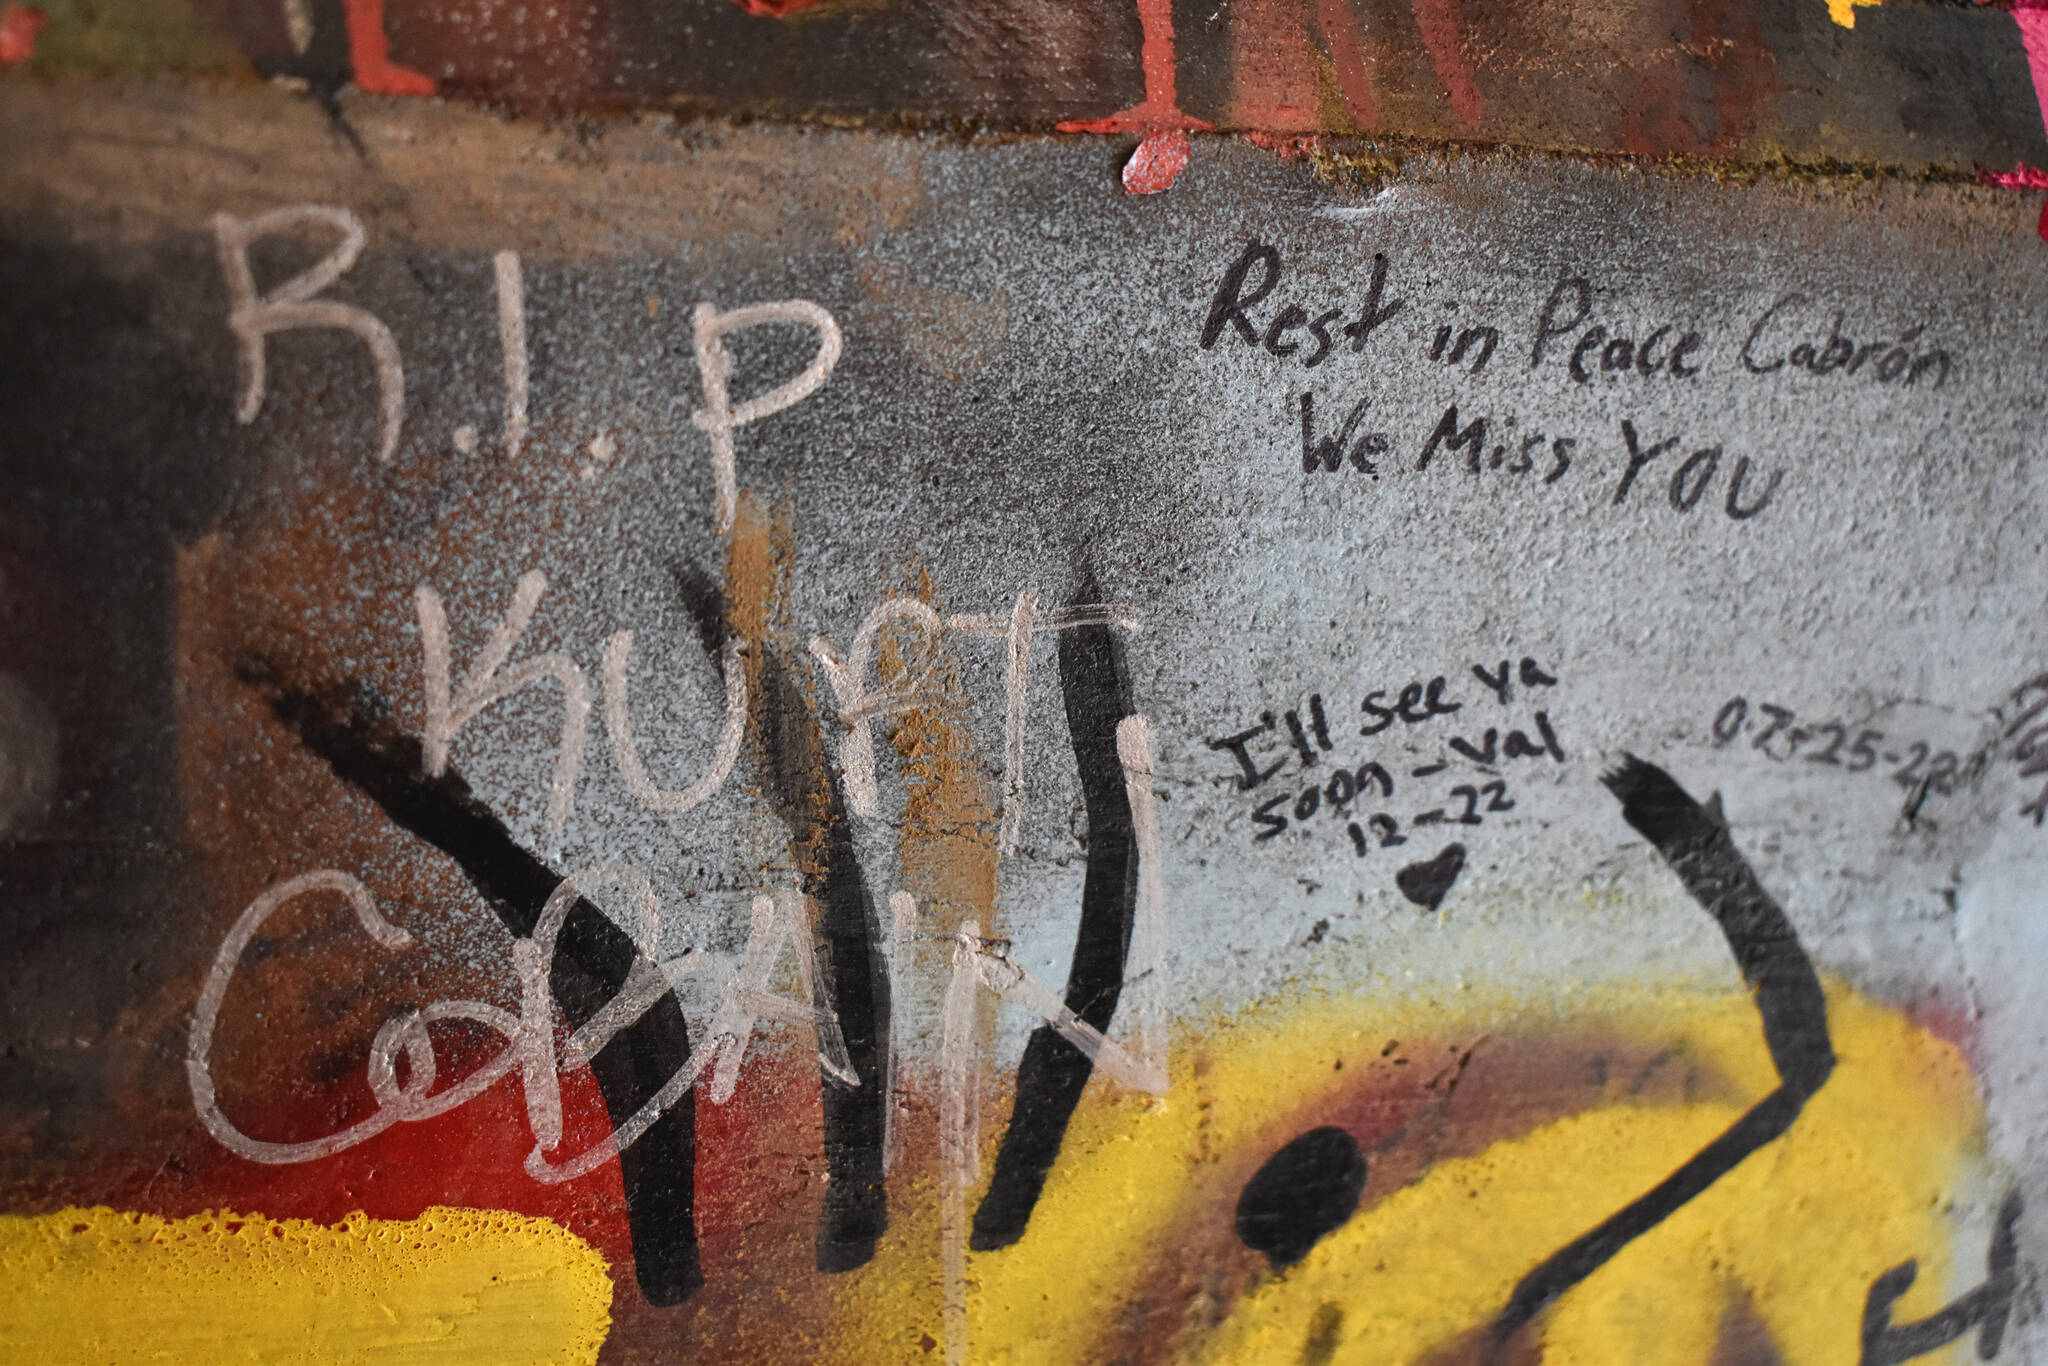 One of many messages that wish the late-Kurt Cobain, who was born in Aberdeen and was the founder of Nirvana, peace since his death in 1994. Cobain, whose influence is seen throughout the city, is credited with founding the Grunge rock genre. (Matthew N. Wells / The Daily World)